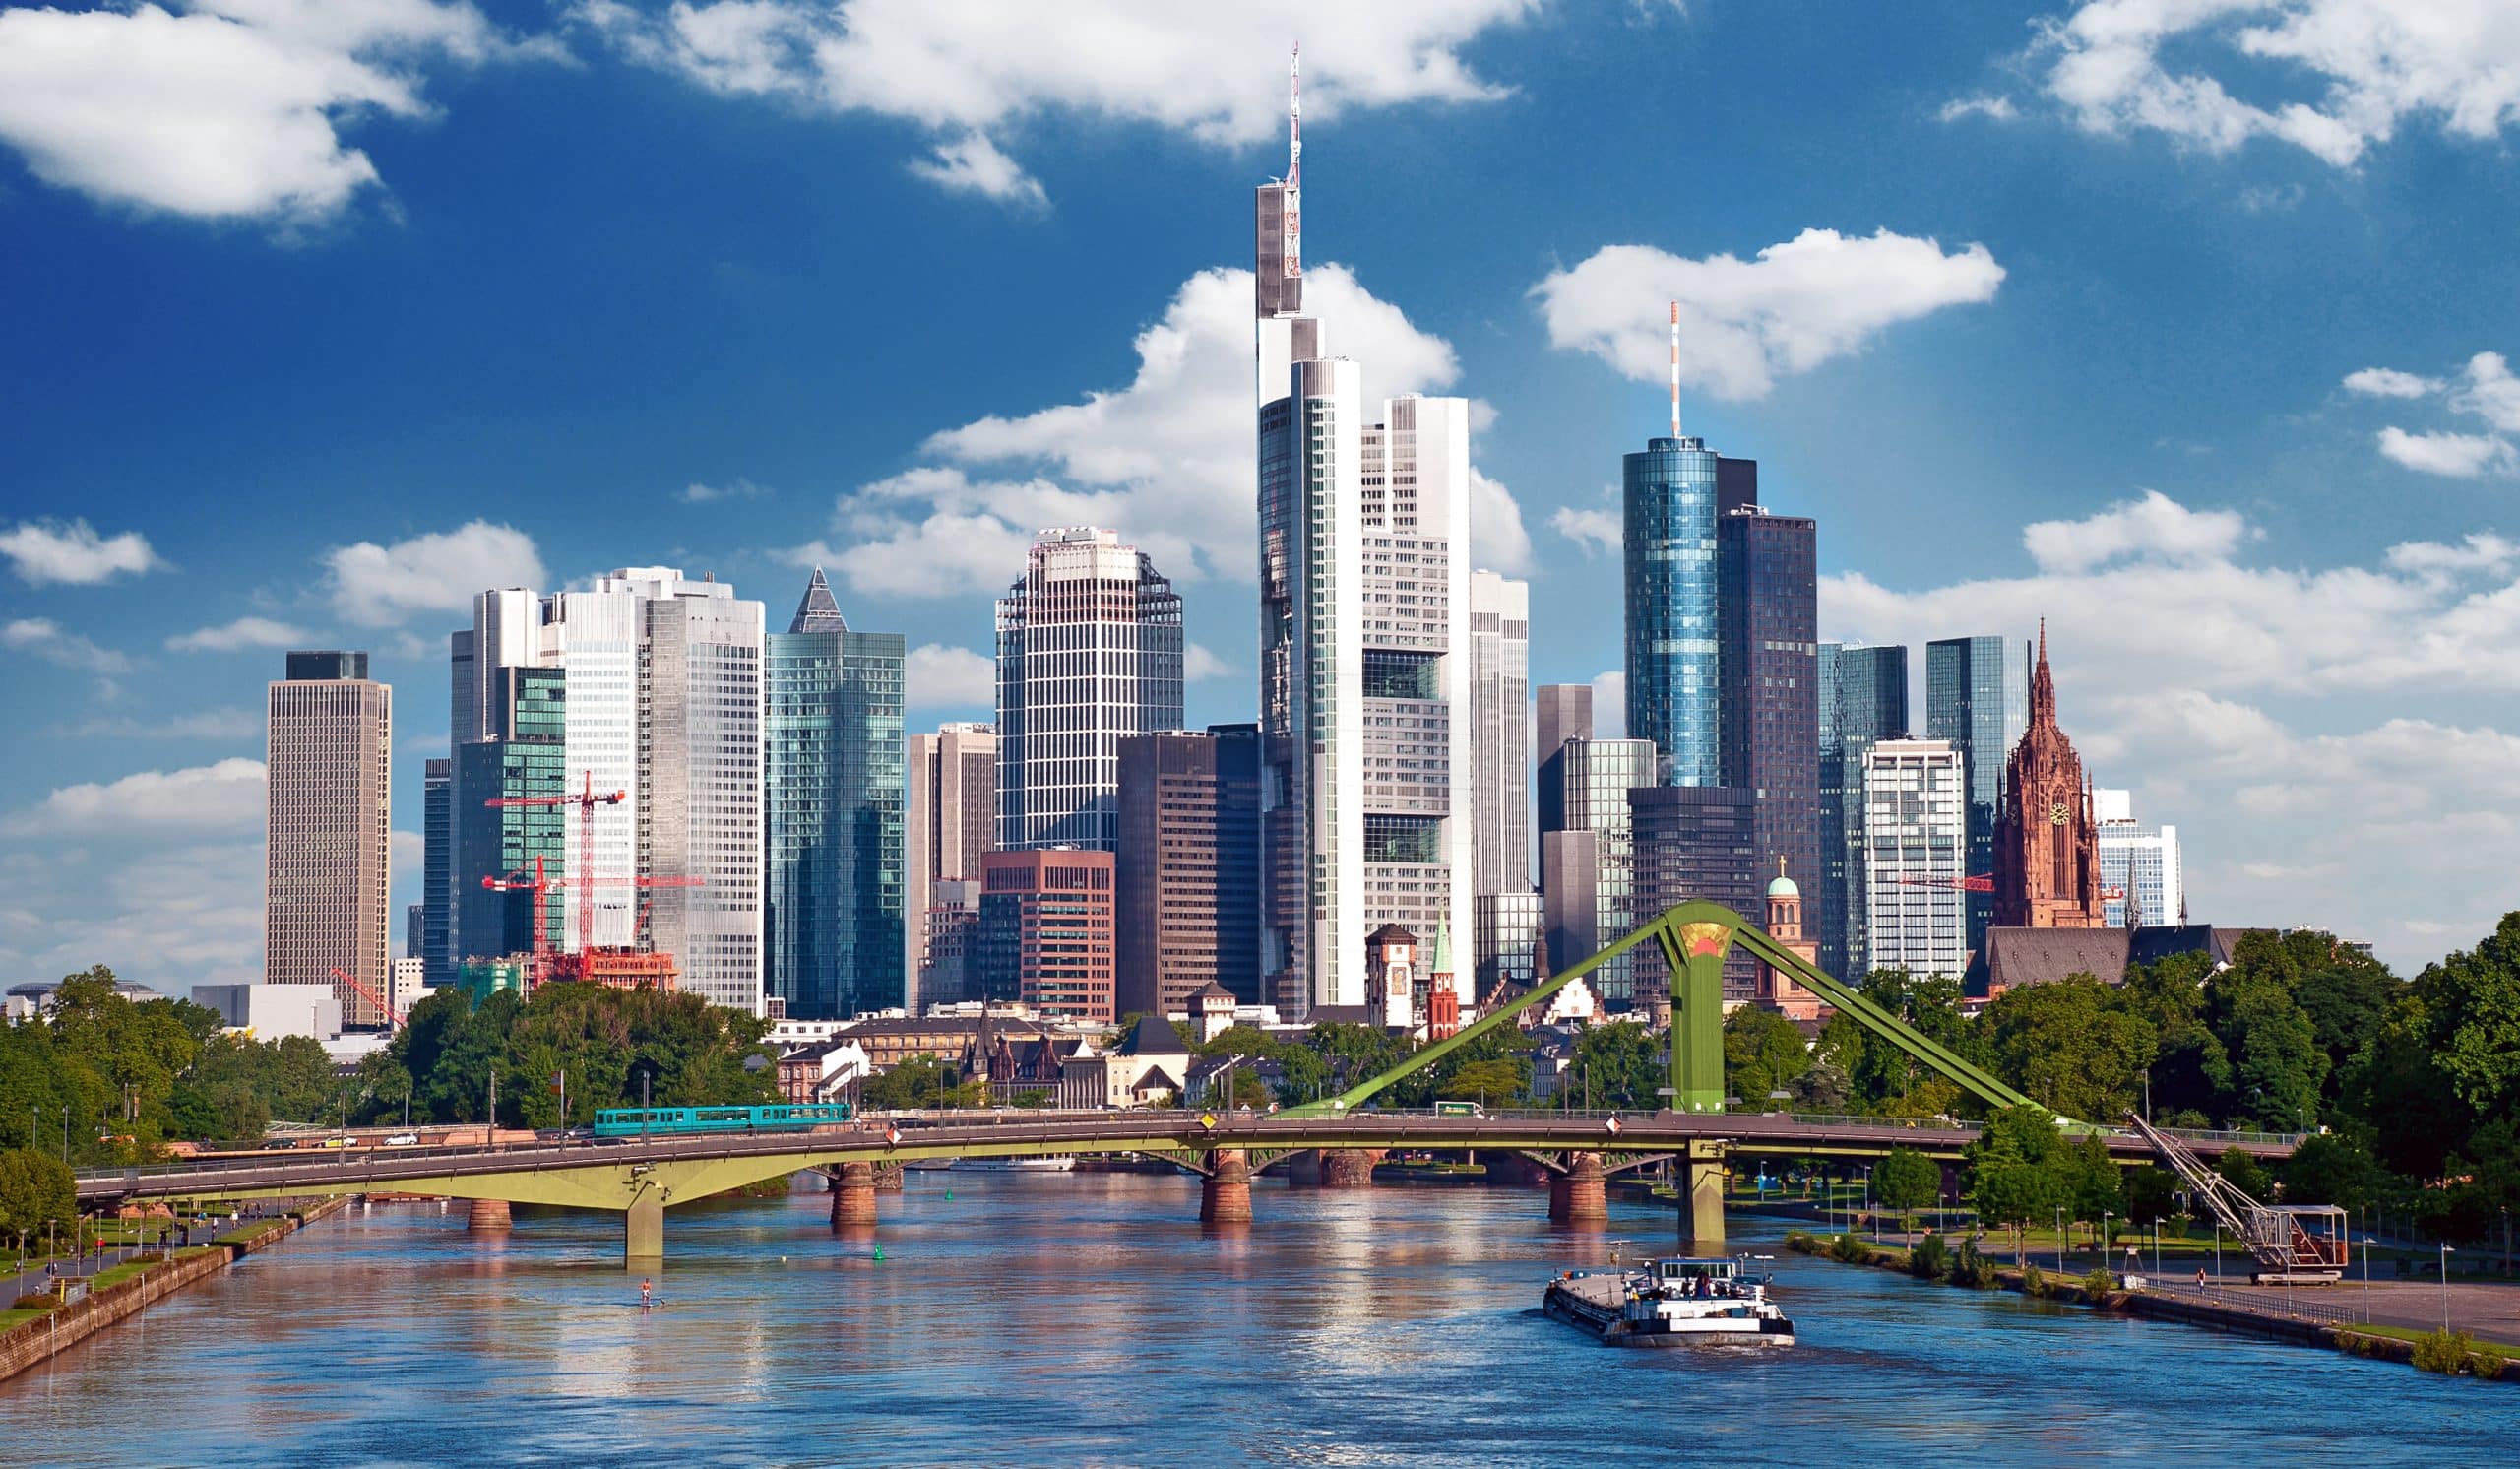 The value of properties in Frankfurt has significantly increased last years